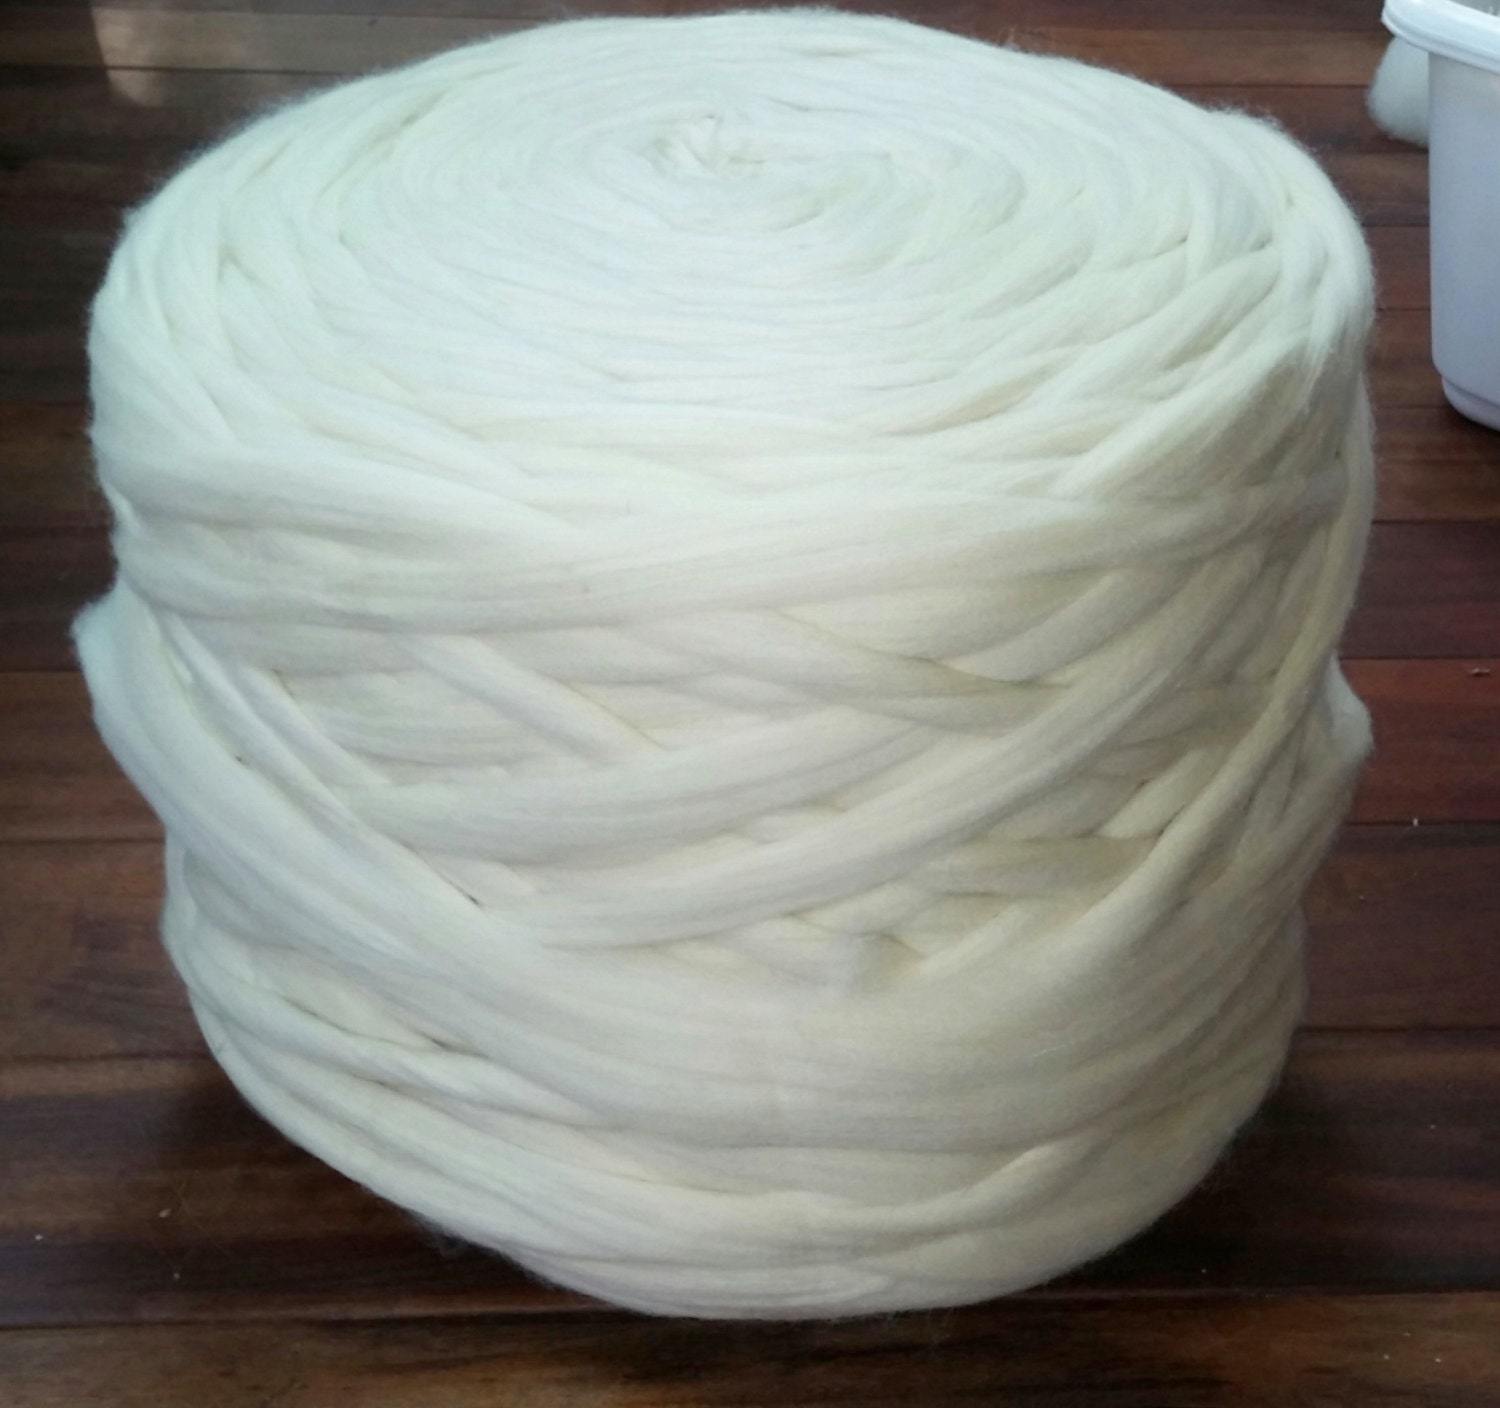 Wholesale Wool Roving, 30lbs Roll Natural White Wool Top Fiber